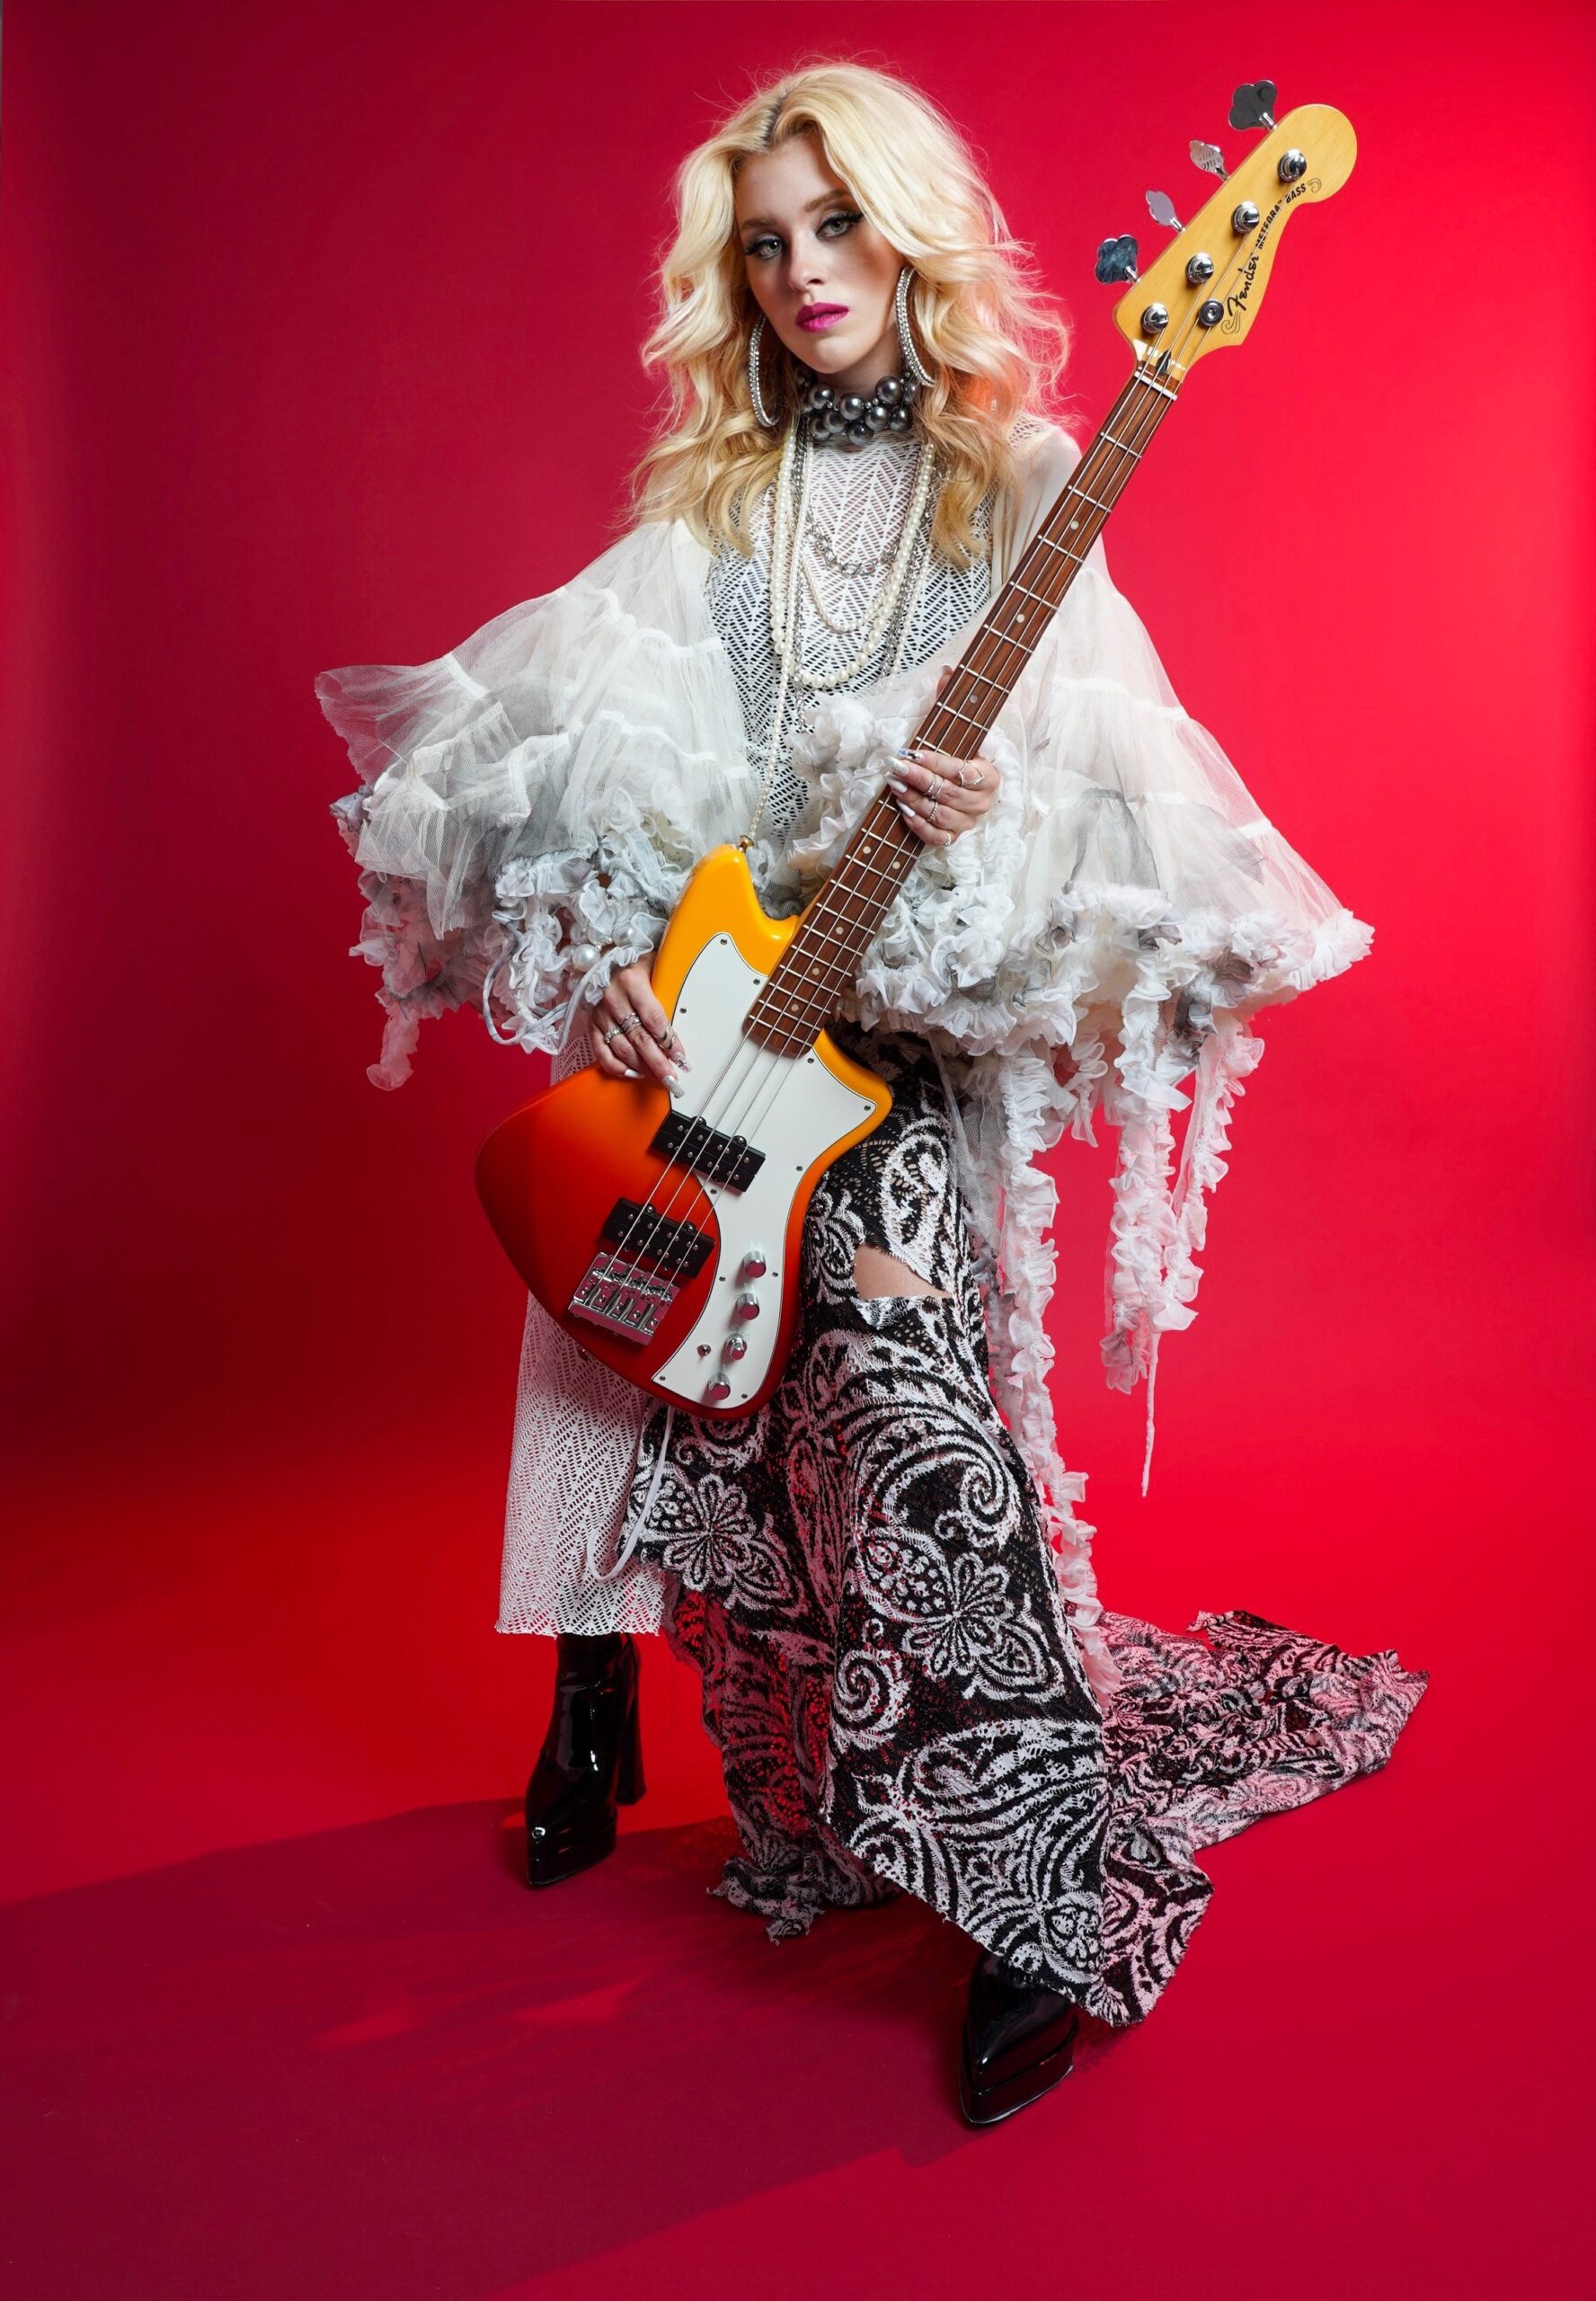 Ashley Suppa, bassist for the all-girl rock band Plush, talks about life on the road, her favorite bass players, and how learning isolated bass tracks translated into a successful career in a rock ‘n’ roll band: “What is happening with my life? How did this end up this way?”